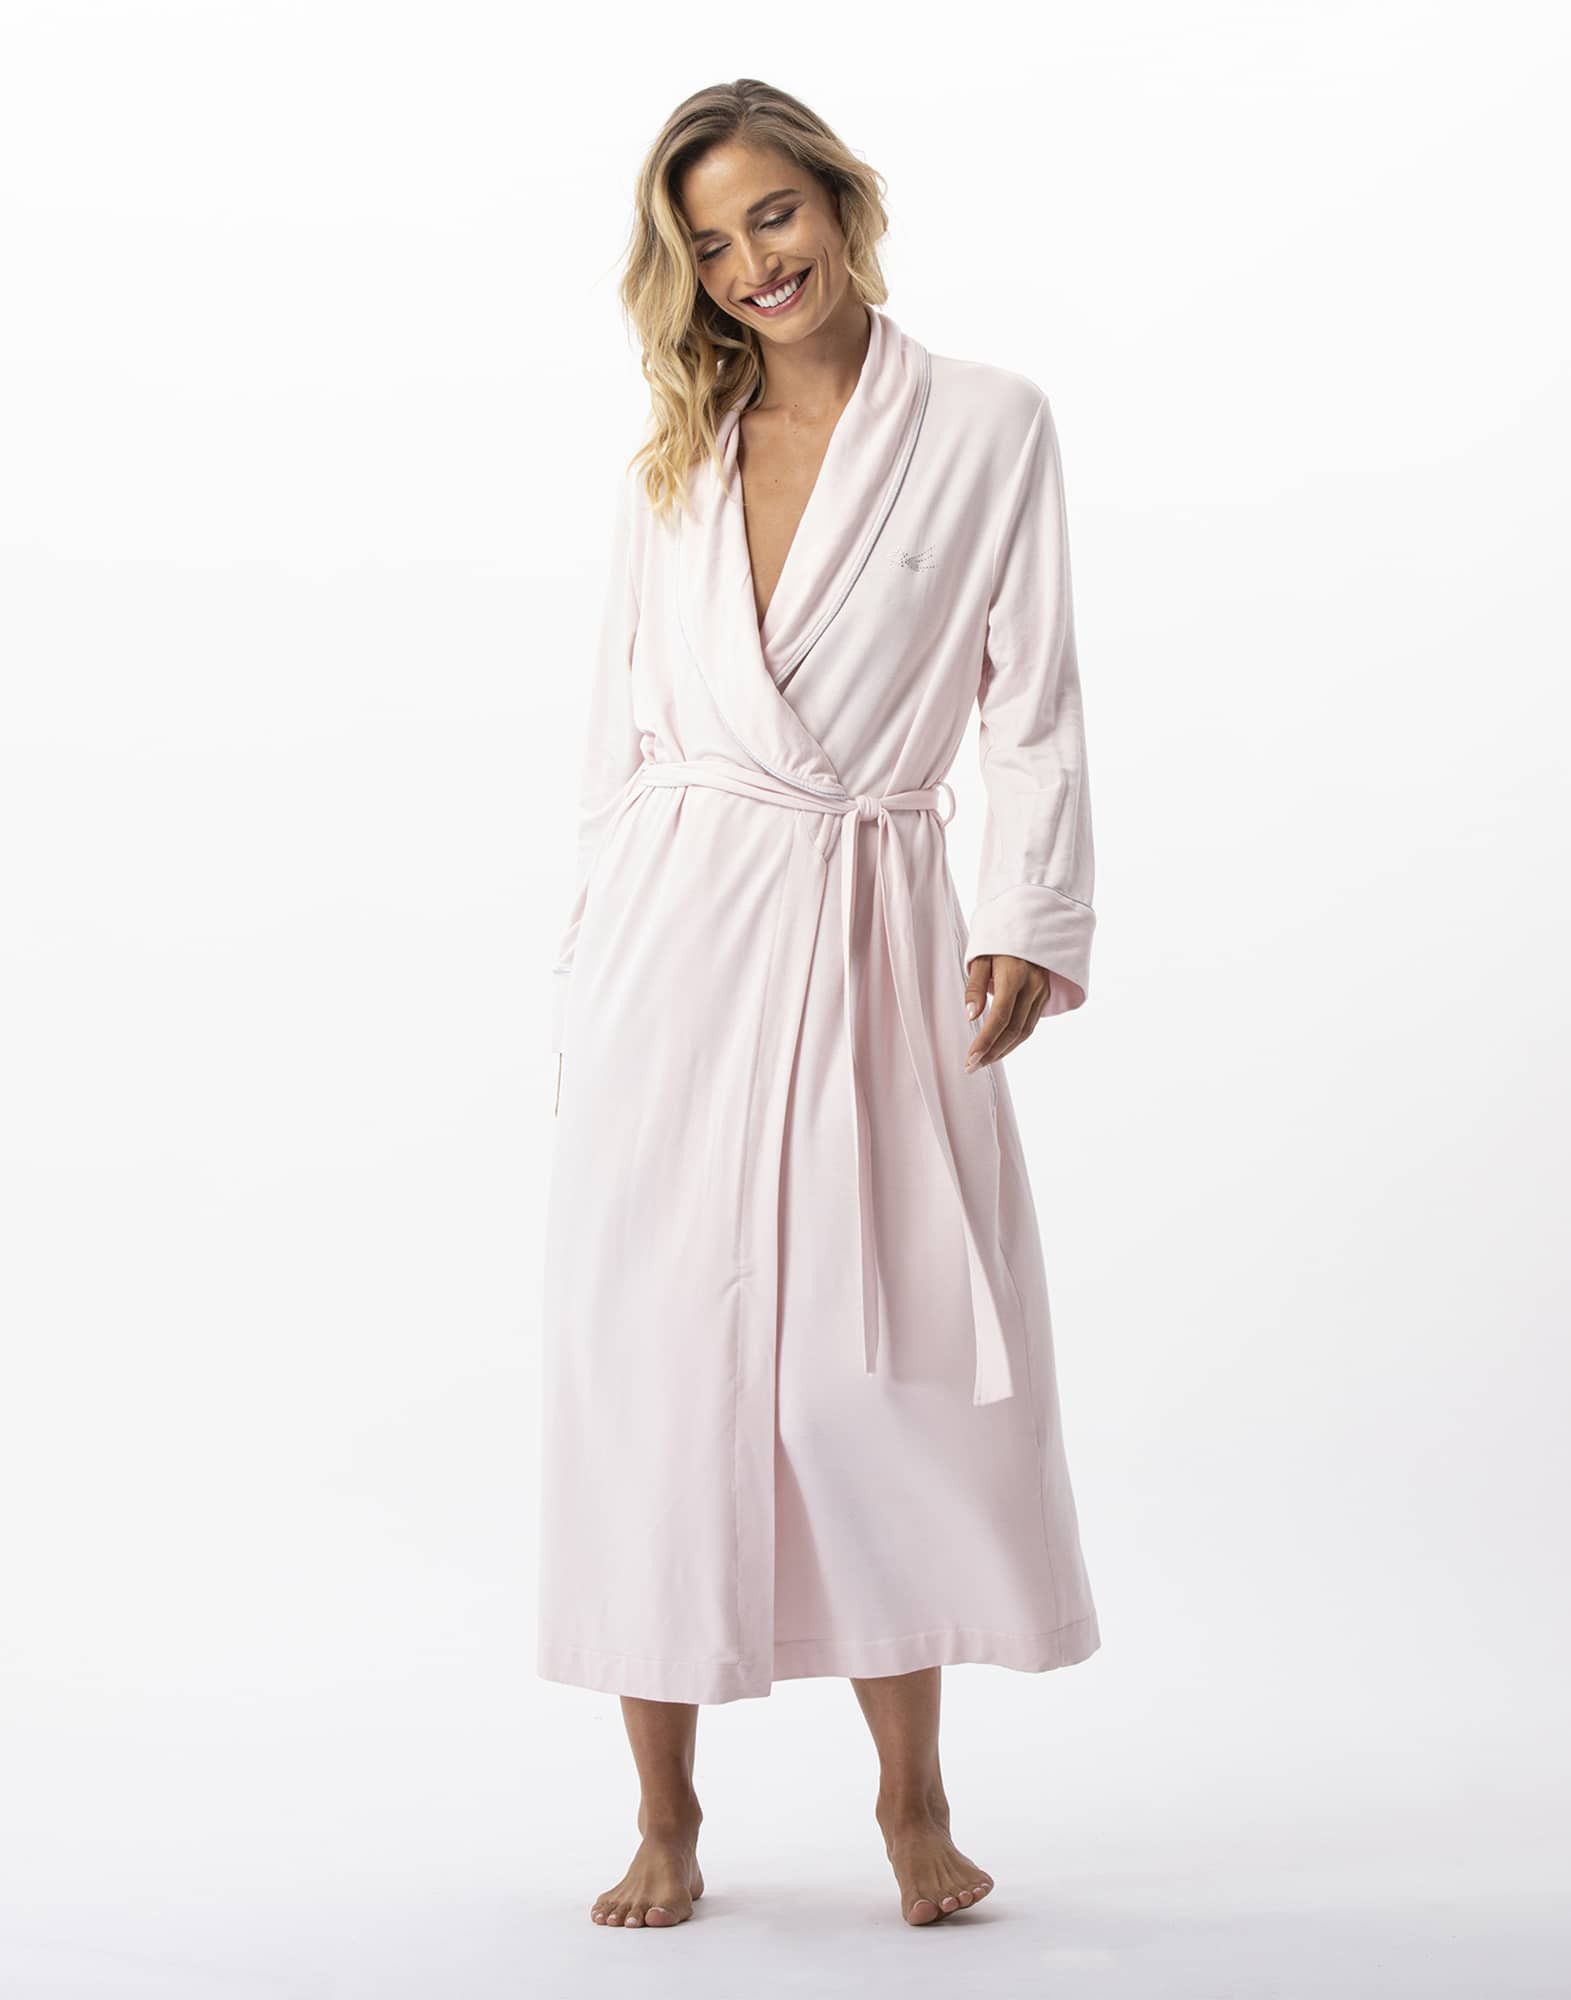 Winter Flannel Bathrobe For Men And Women Plus Size, Long Dressing Gown,  Sexy Cotton Mens Sleepwear And Pajamas From Bdfashionclothing, $42.15 |  DHgate.Com